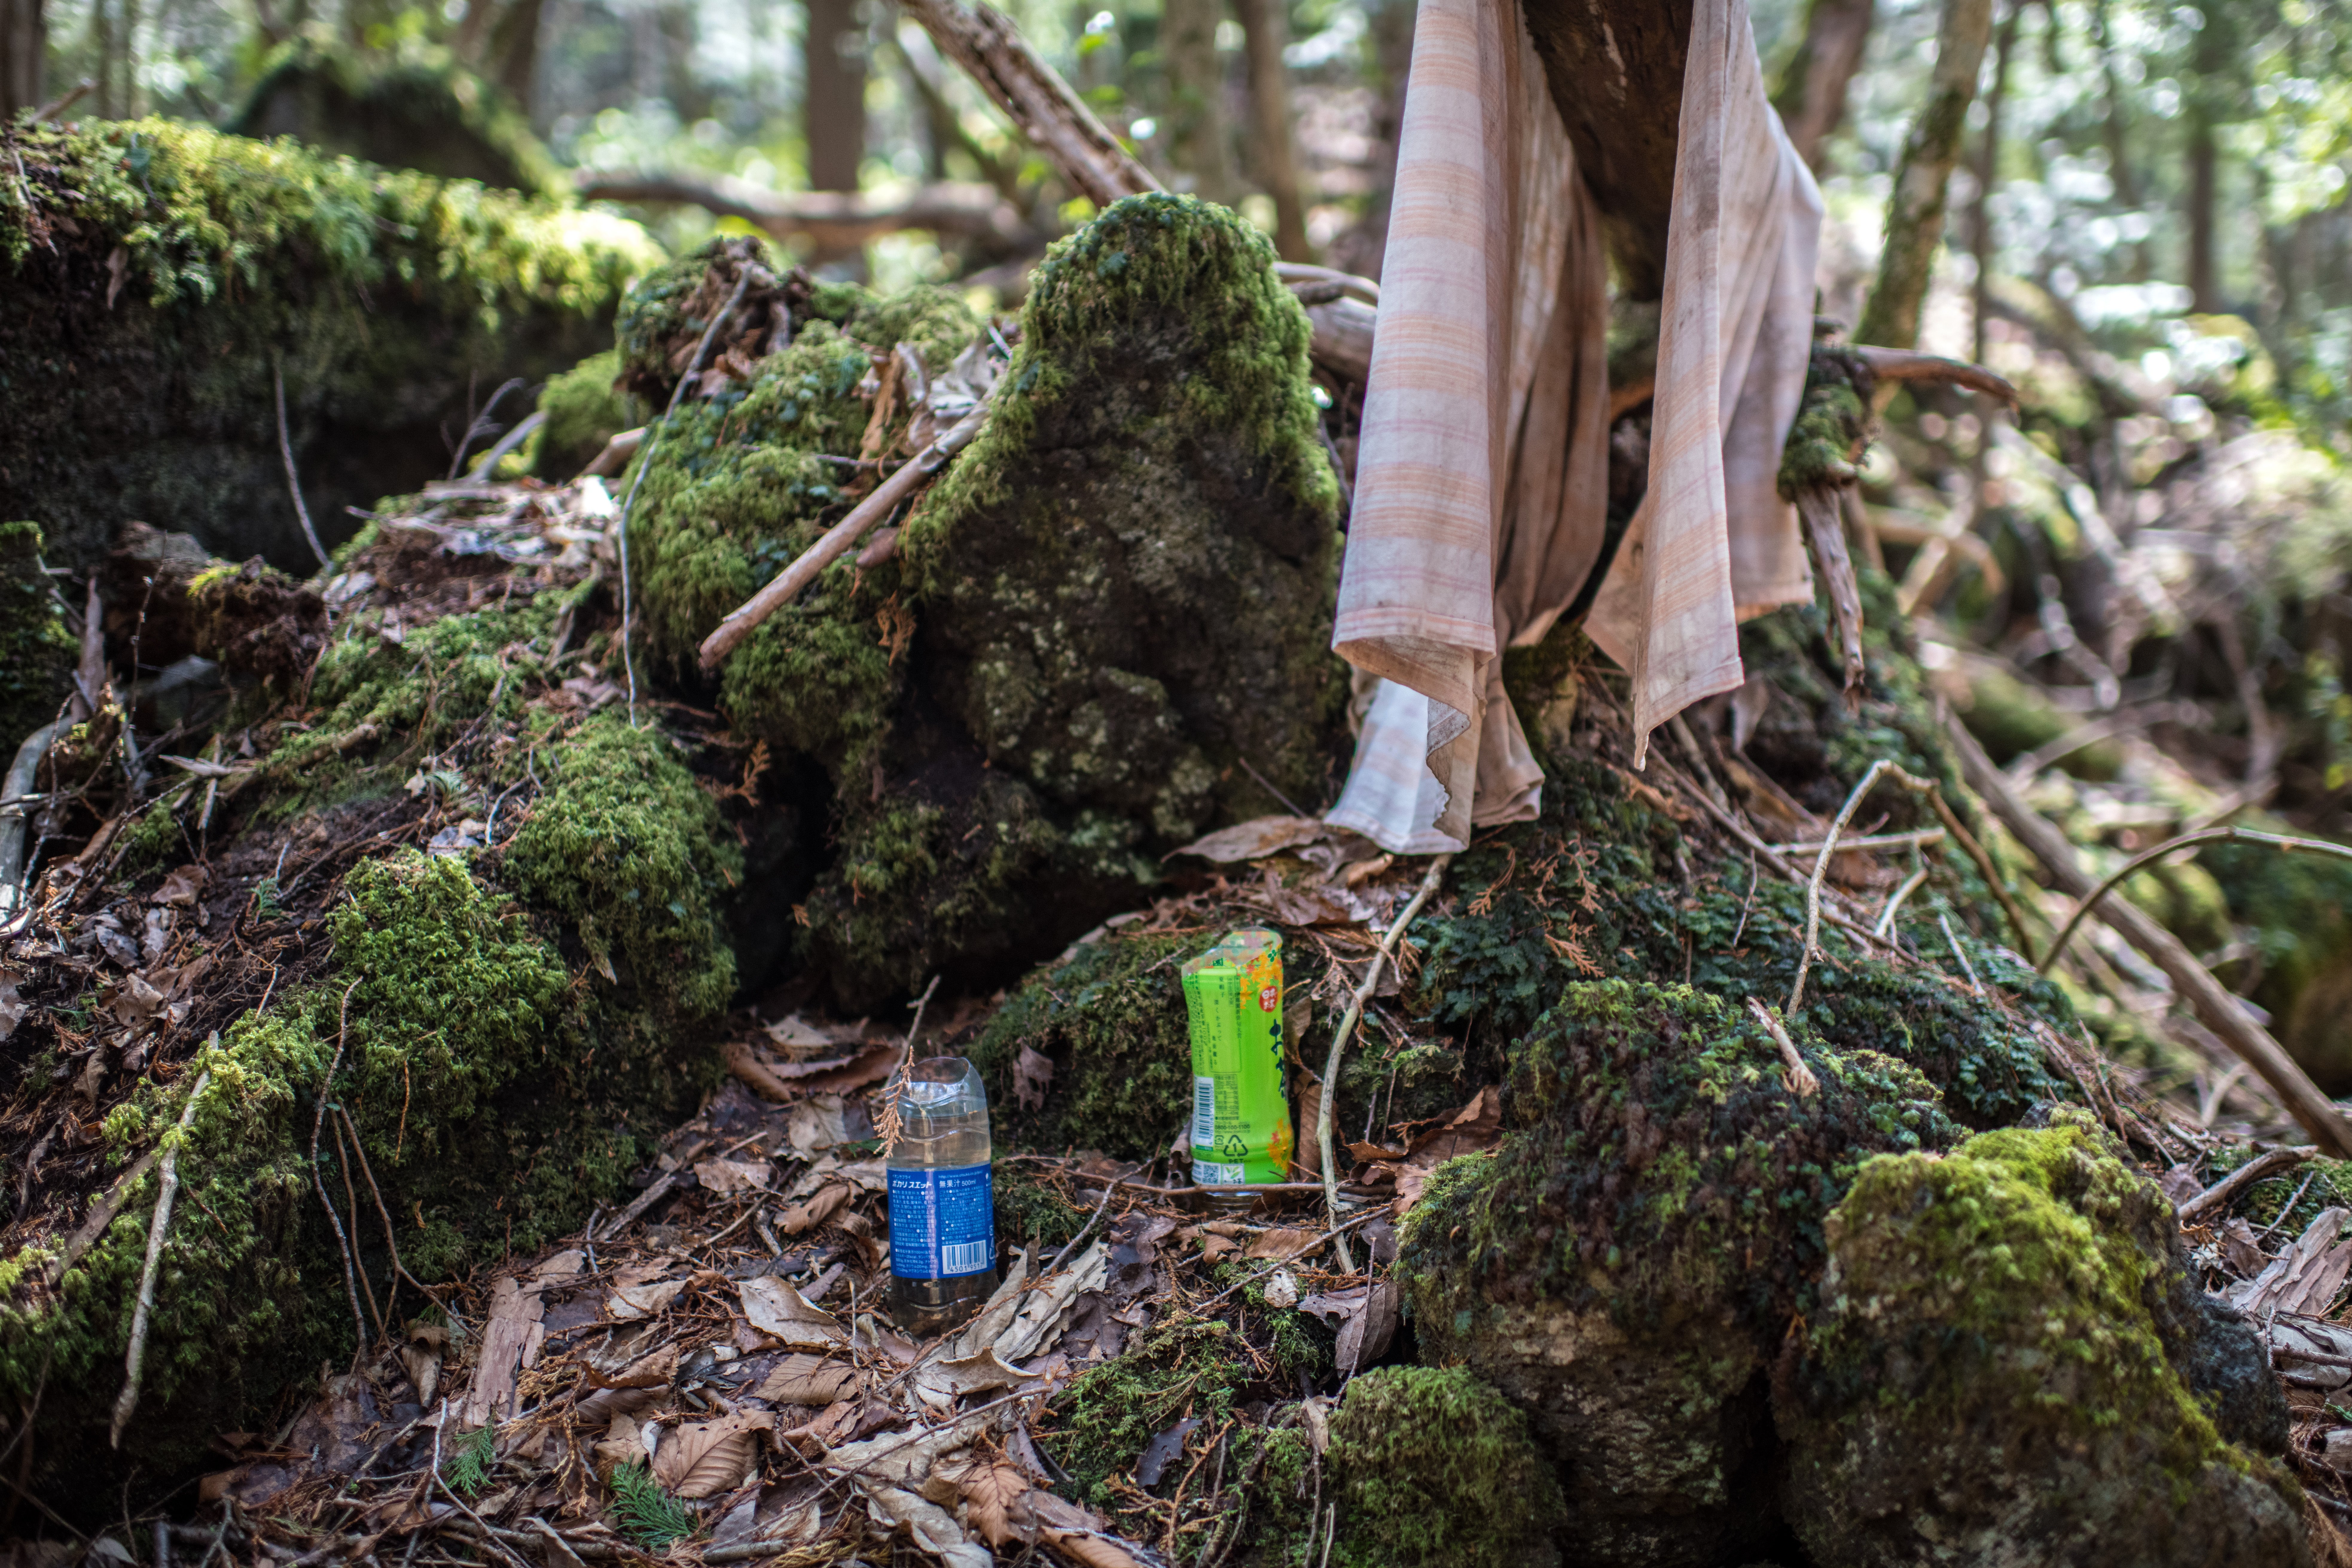 Aokigahara forest lies on the on the northwestern flank of Mount Fuji and in recent years has become known as one of the world’s most prevalent suicide sites.